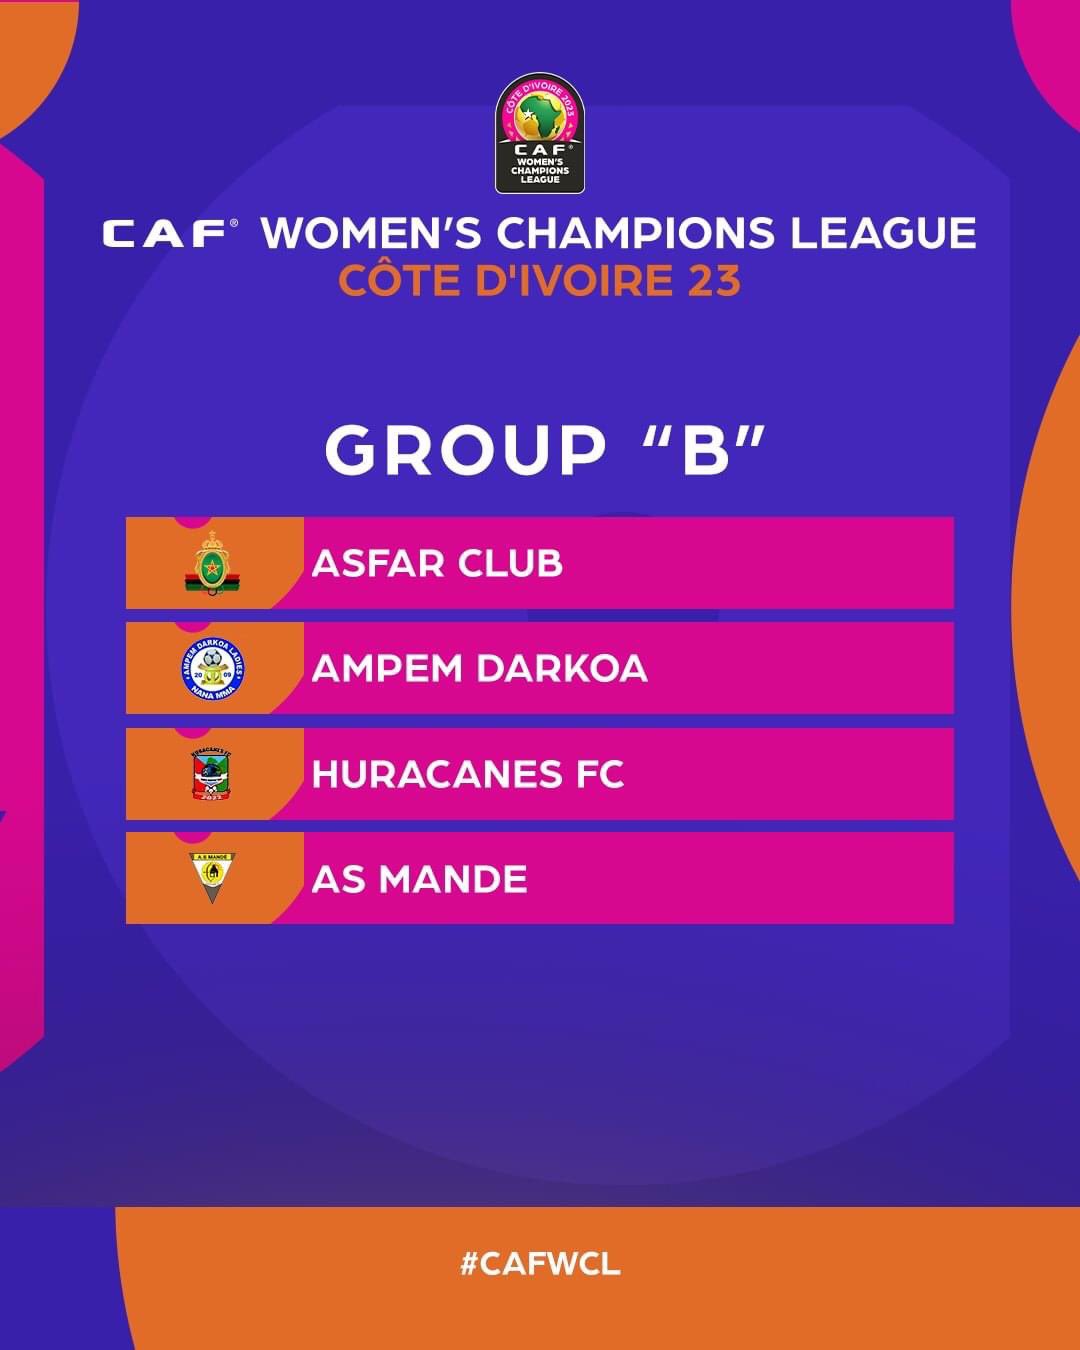 Ampem Darkoa Ladies Paired In Group B Of CAF Women’s Champions League